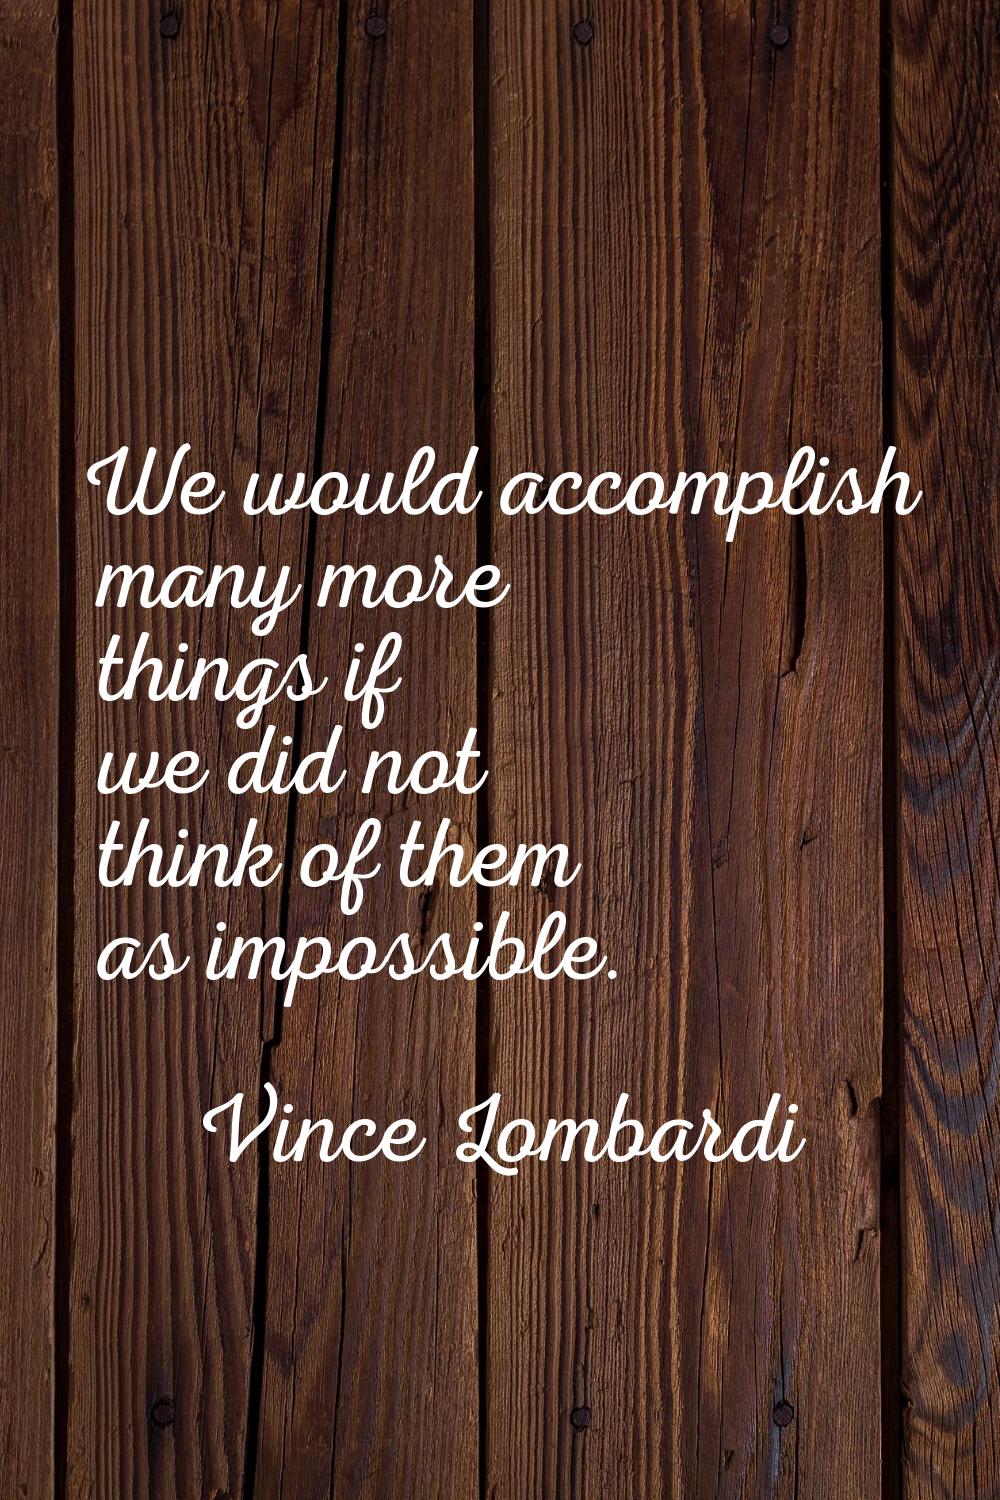 We would accomplish many more things if we did not think of them as impossible.